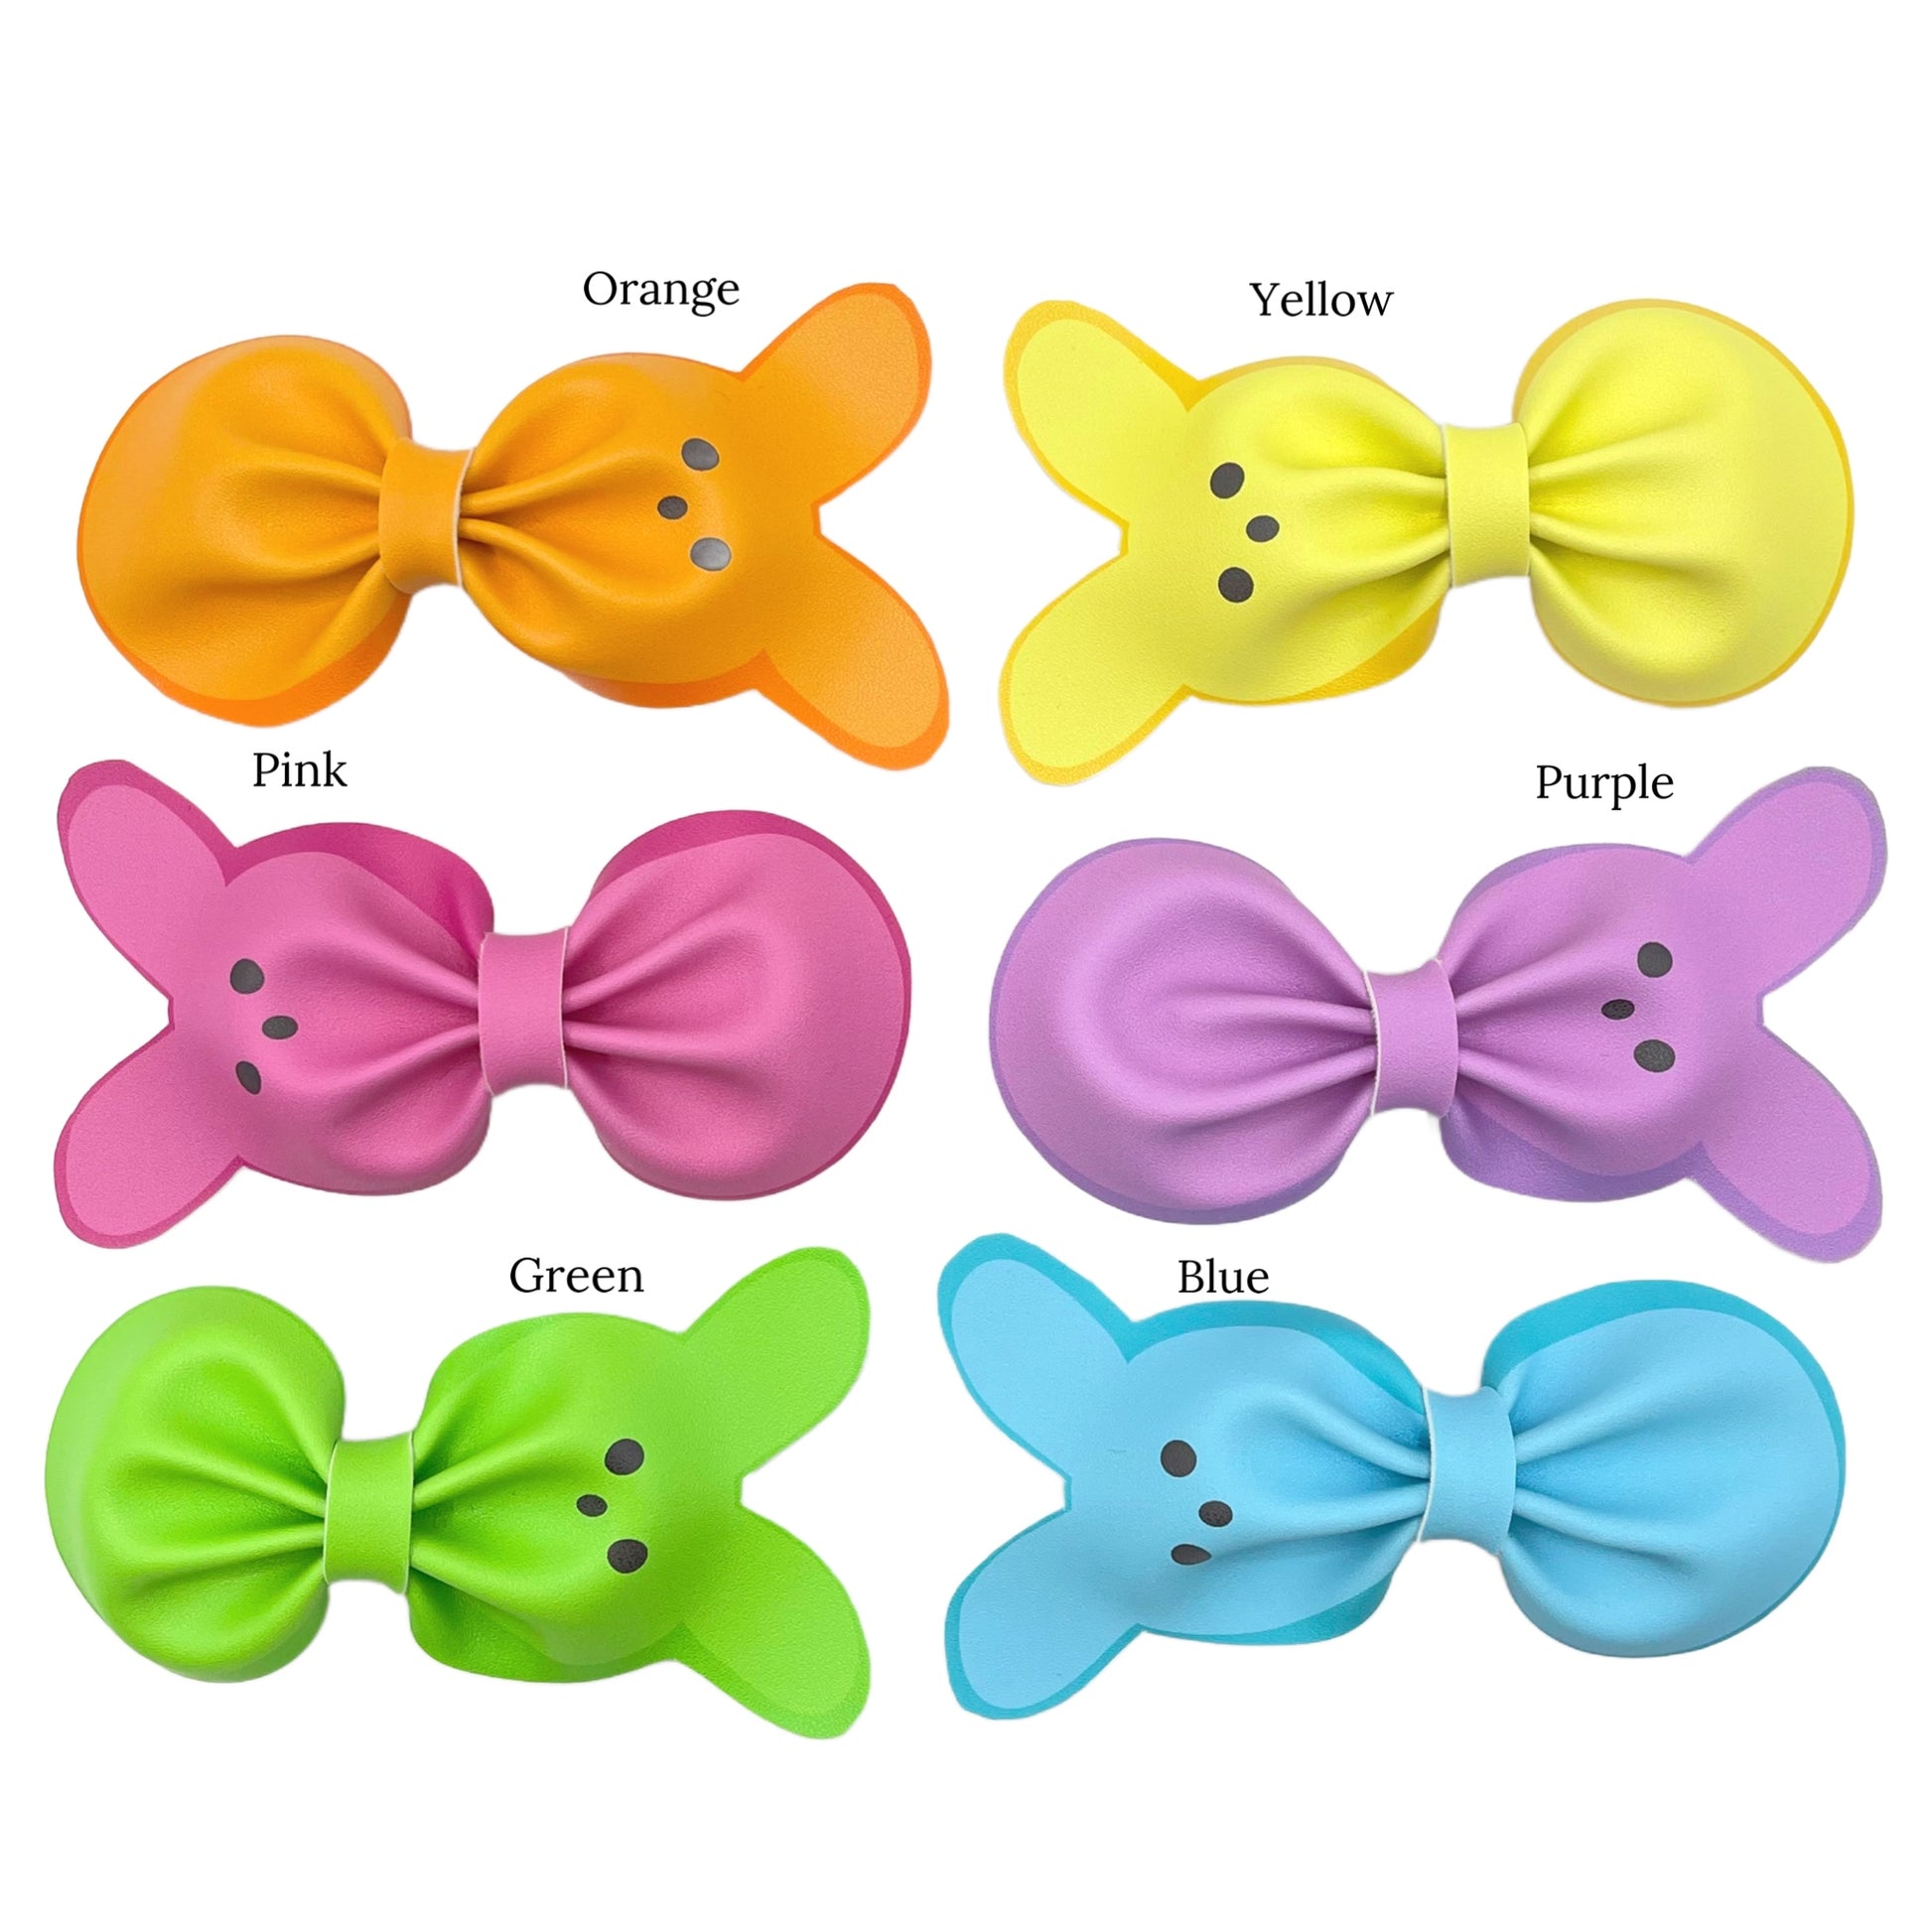 faux leather marshmallow bunnies on faux leather in pink purple orange yellow green and blue